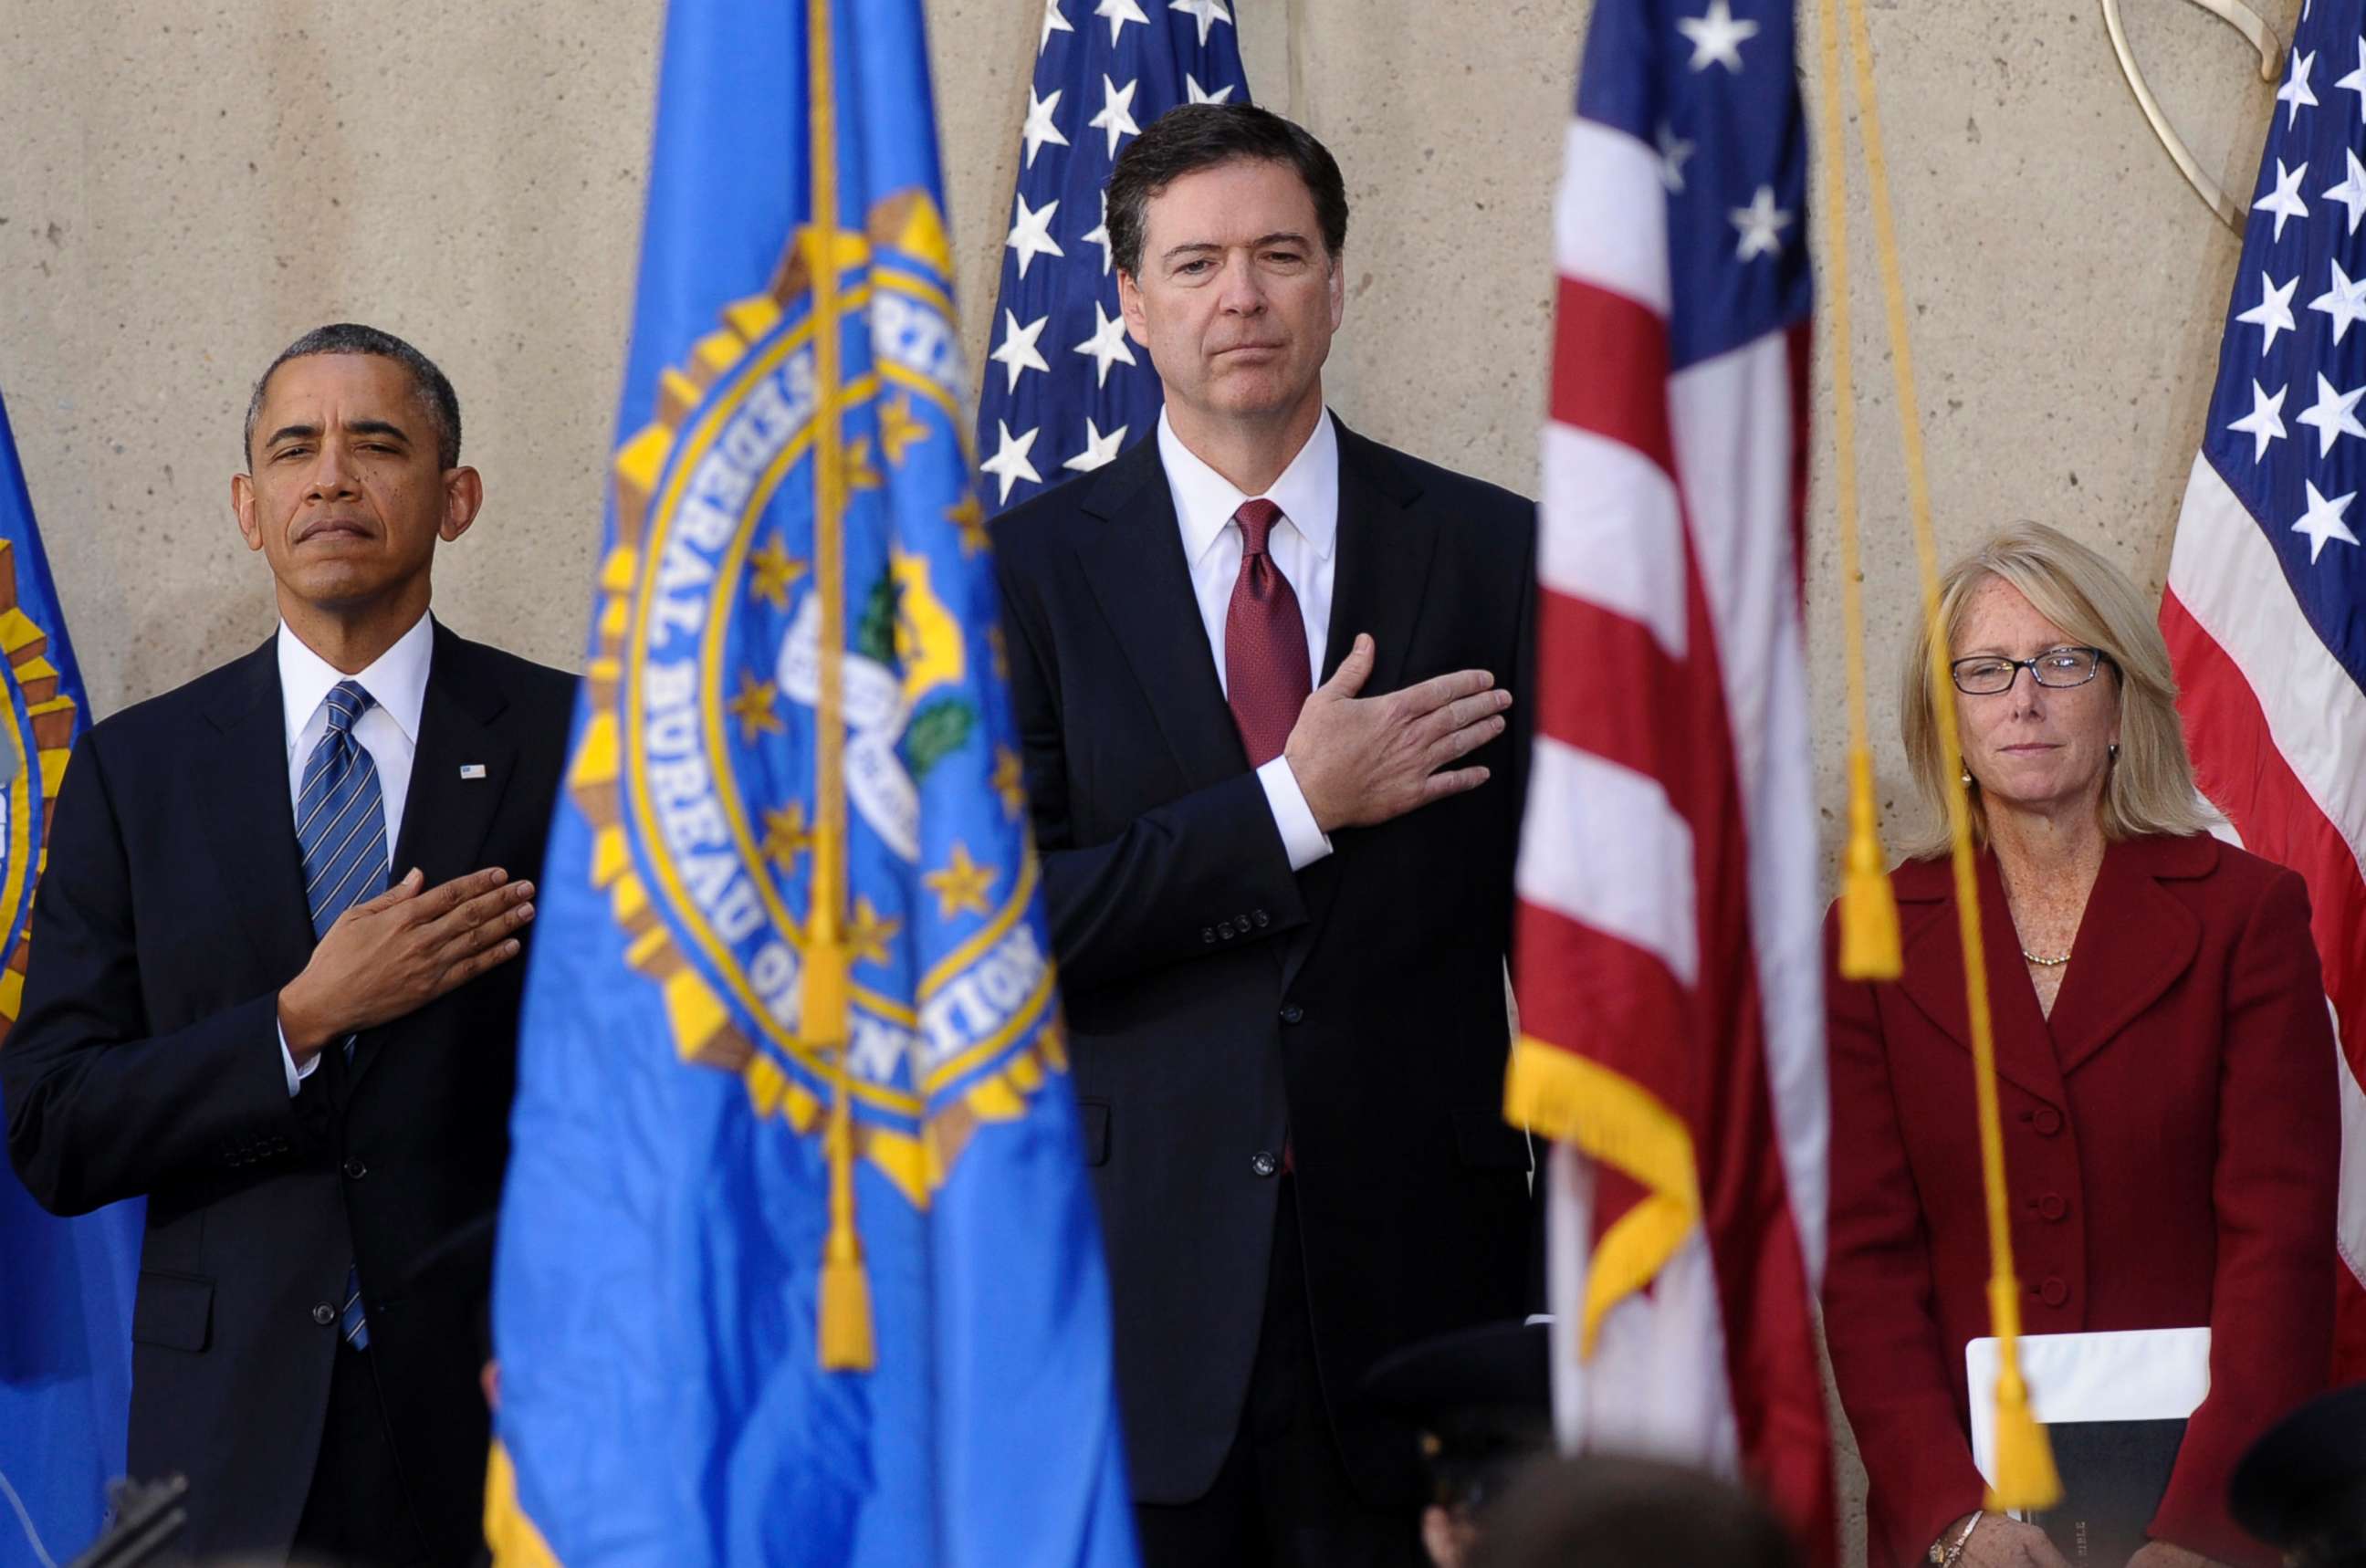 PHOTO: From left, President Barack Obama stands with James Comey  and his wife Patrice Failor during the singing of the National Anthem at Comey's installation as FBI Director, Monday, Oct. 28, 2013, at FBI Headquarters in Washington, D.C.